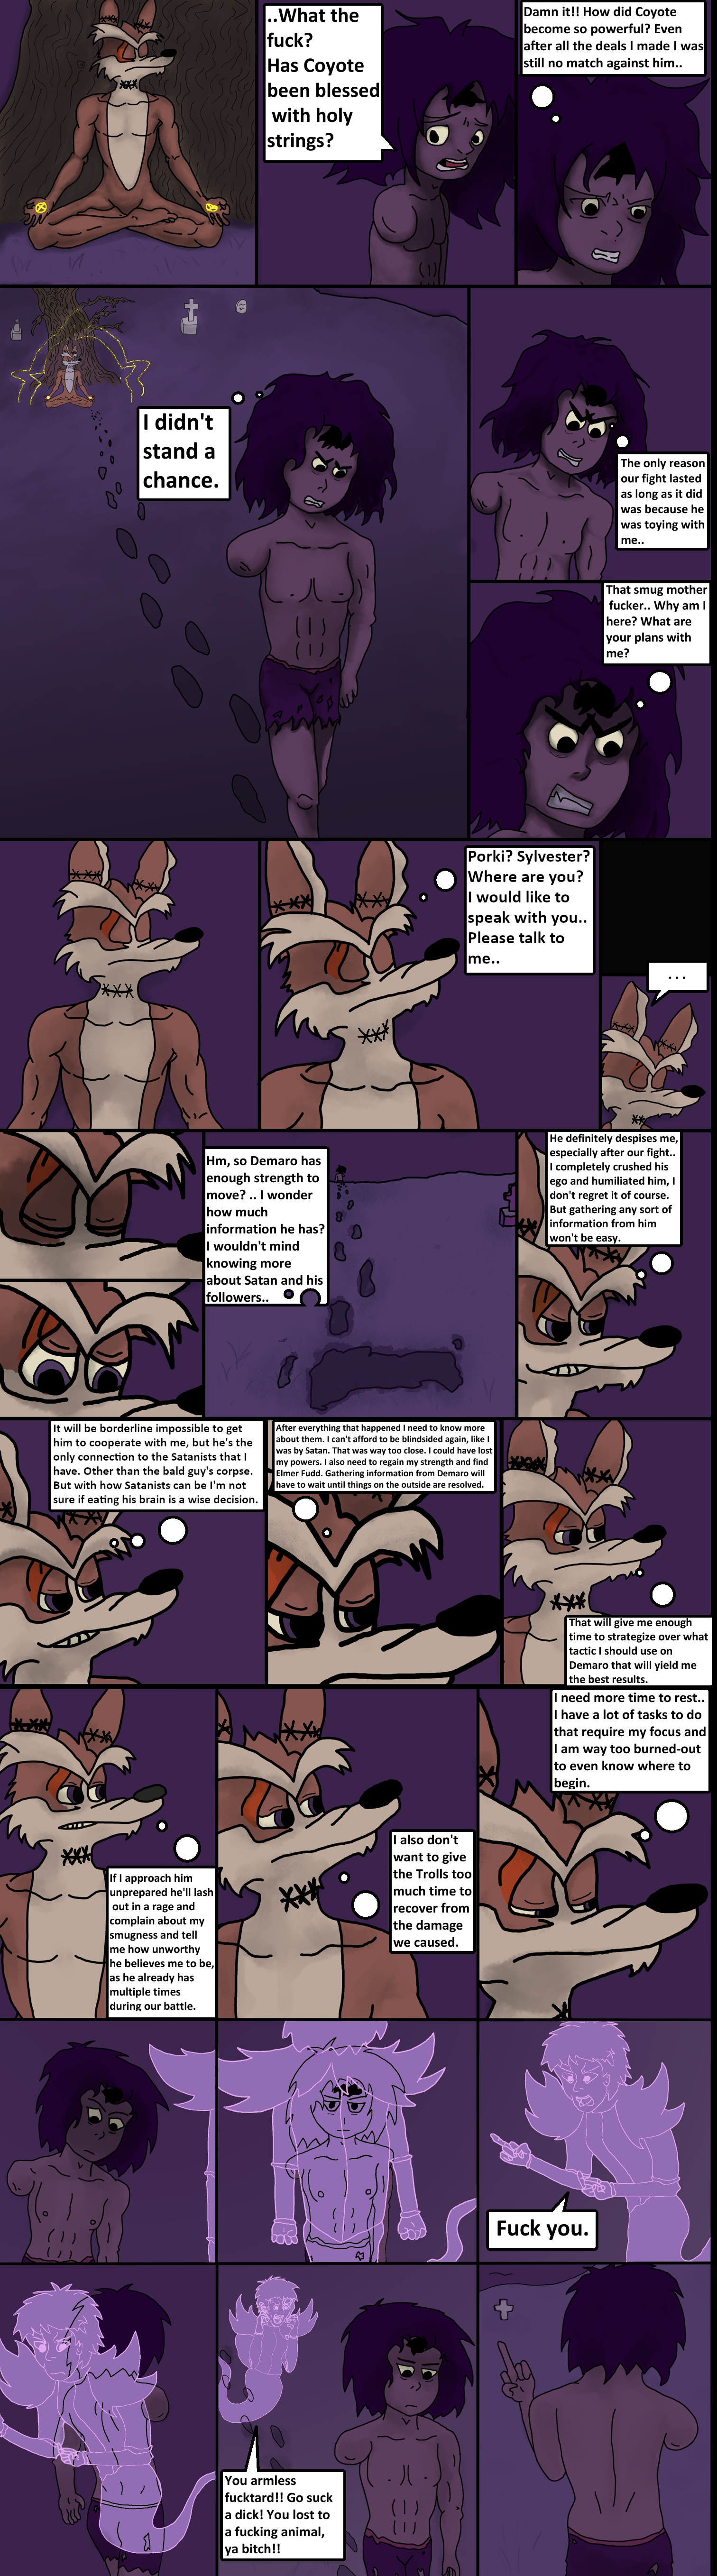 ch27/pg16.png. If you're seeing this, enable images. Or, perhaps we have a website issue. Try refreshing, if unsuccessful email c@commodorian.org with a detailed description of how you got here.